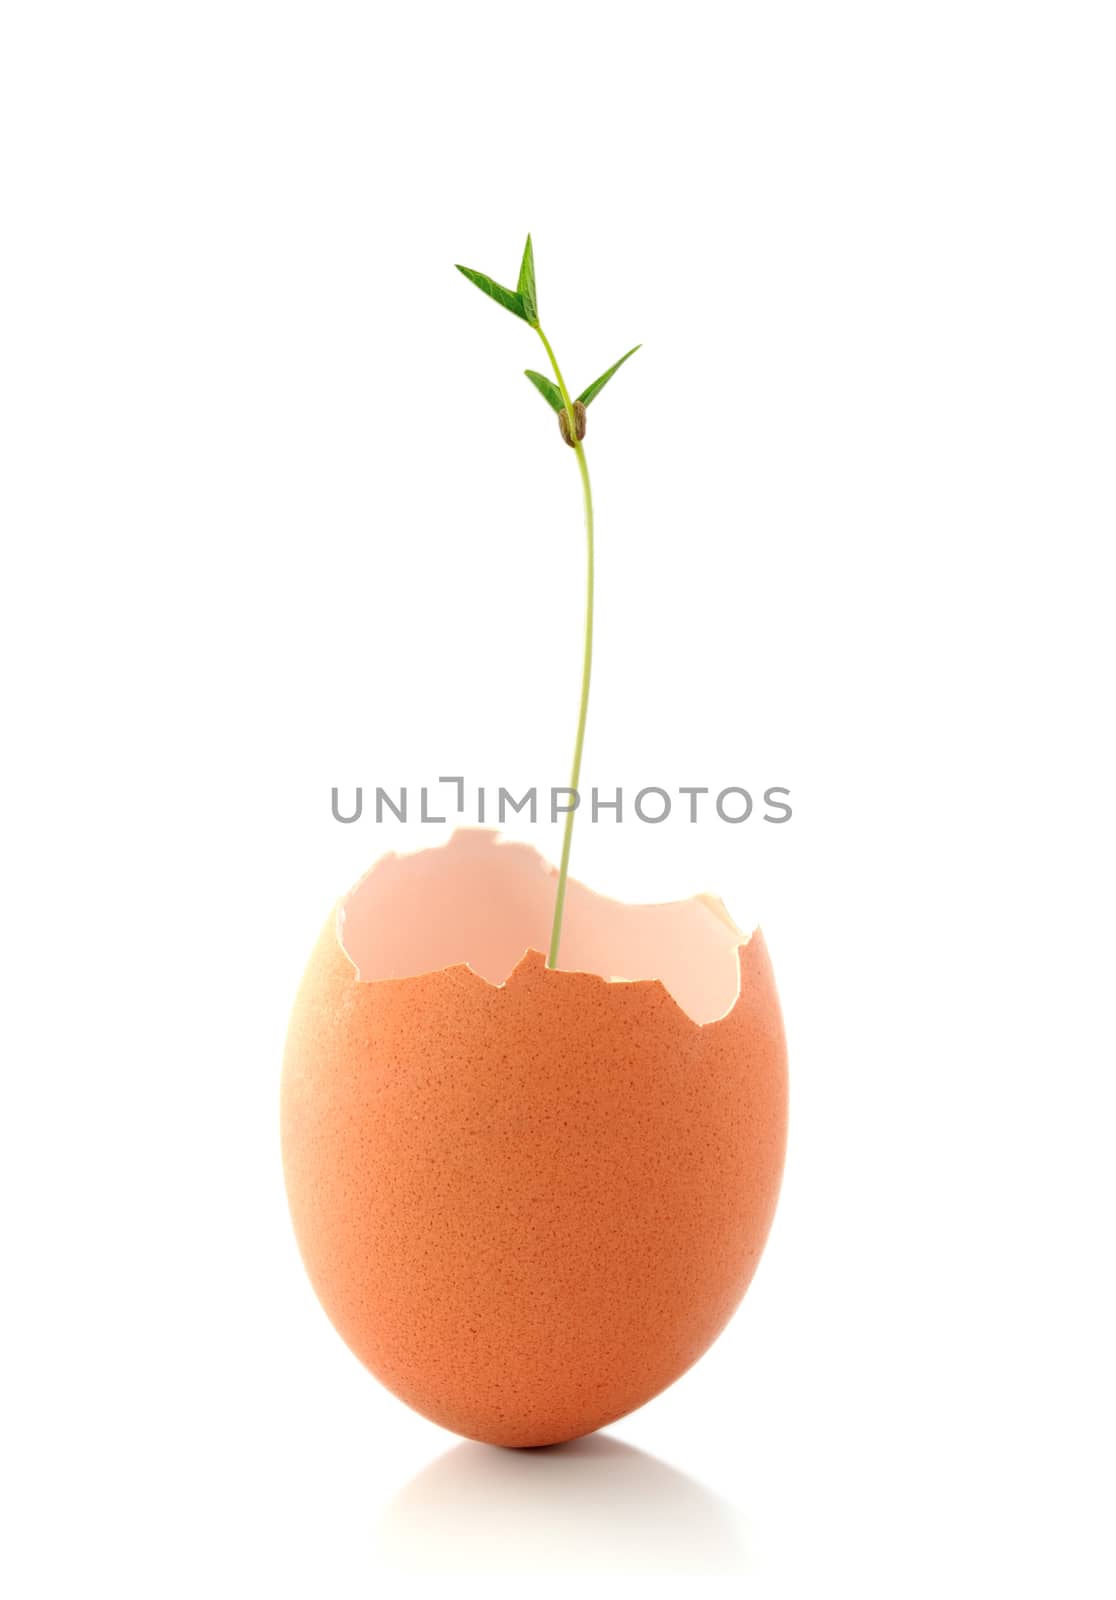 egg shell  with green plant growing isolated